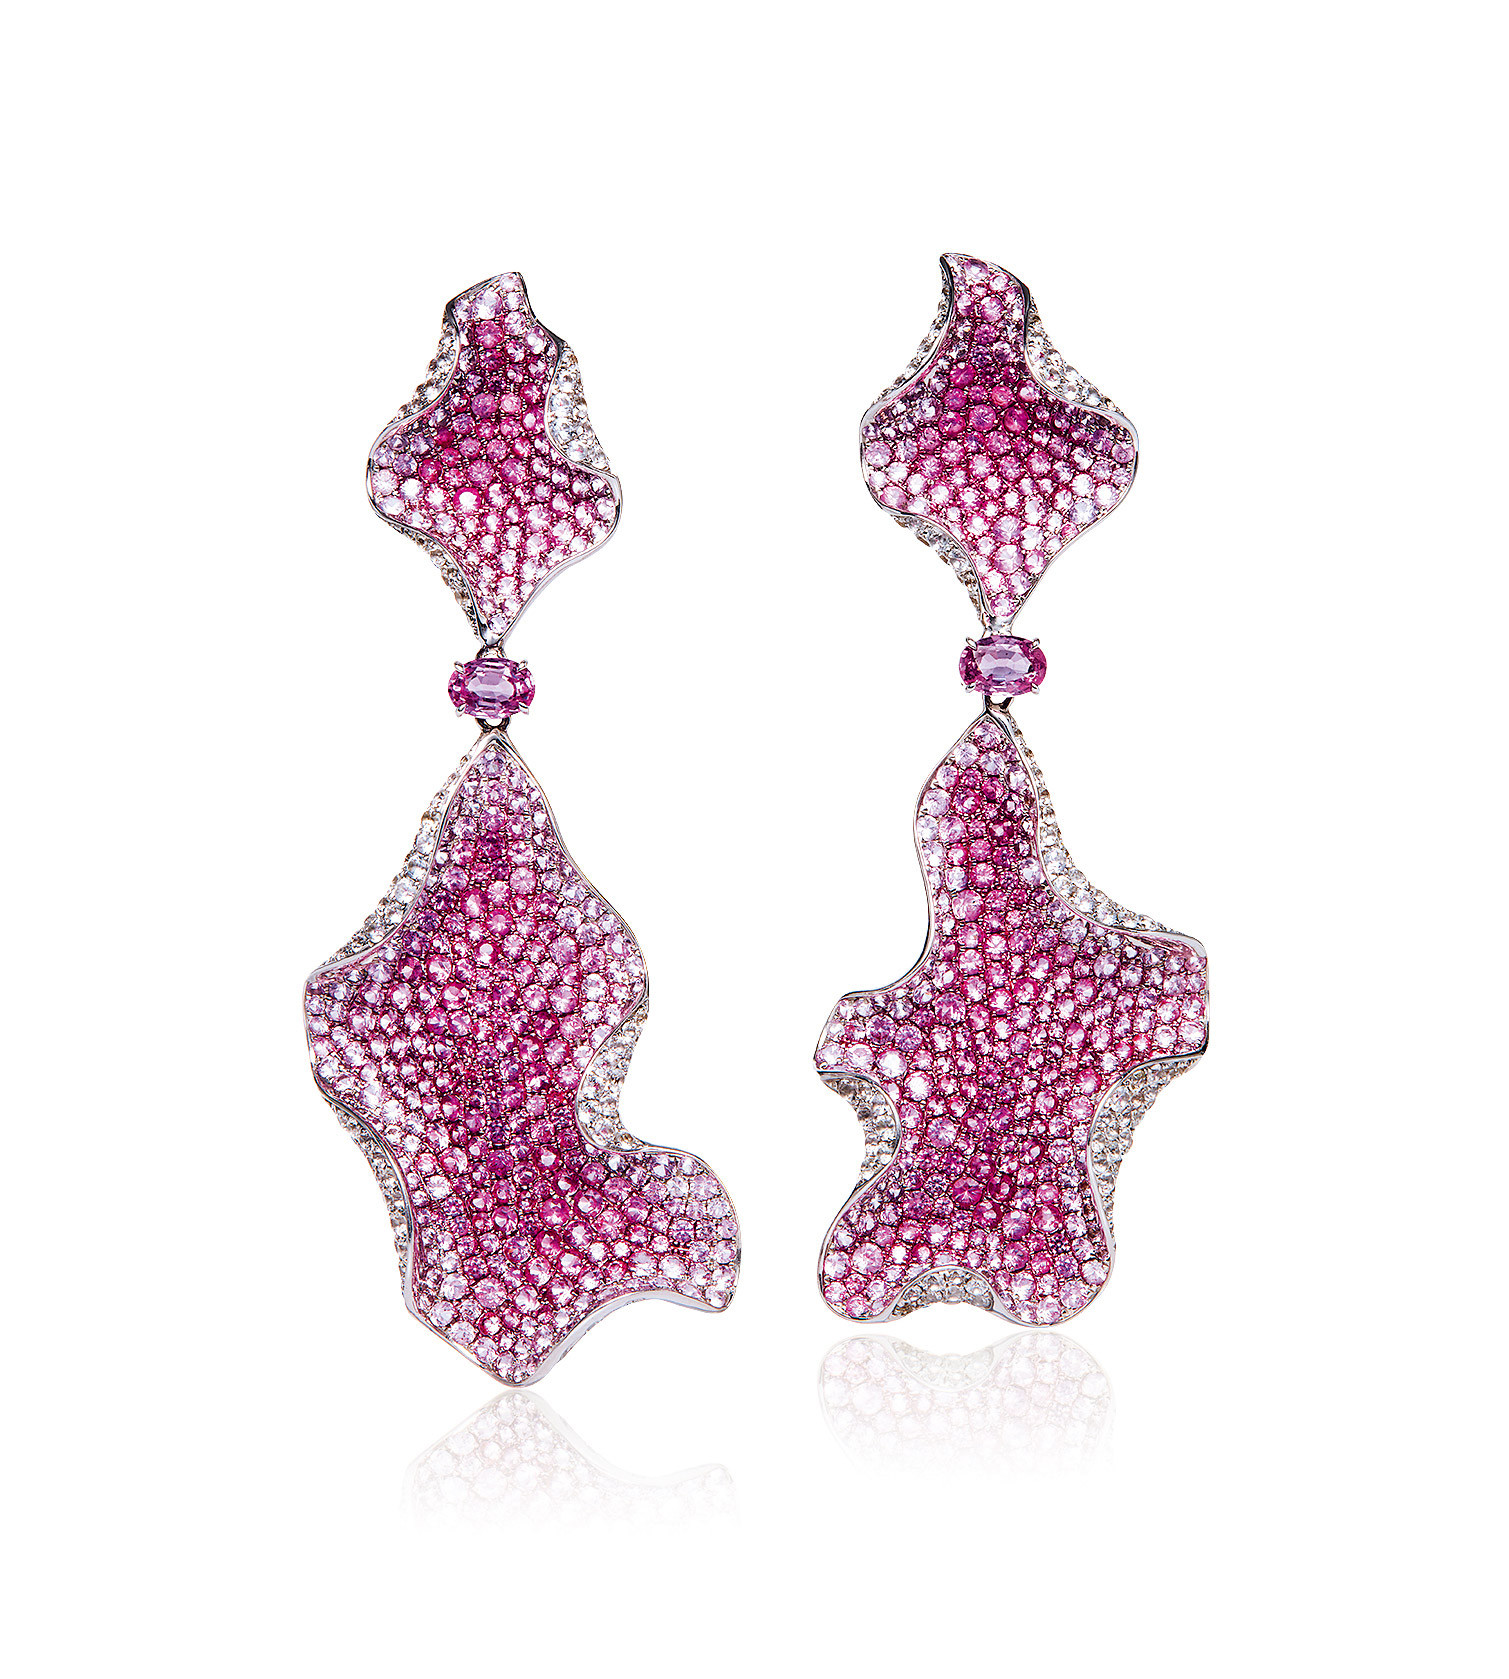 A PAIR OF PINK SAPPHIRE AND DIAMOND EAR PENDANTS